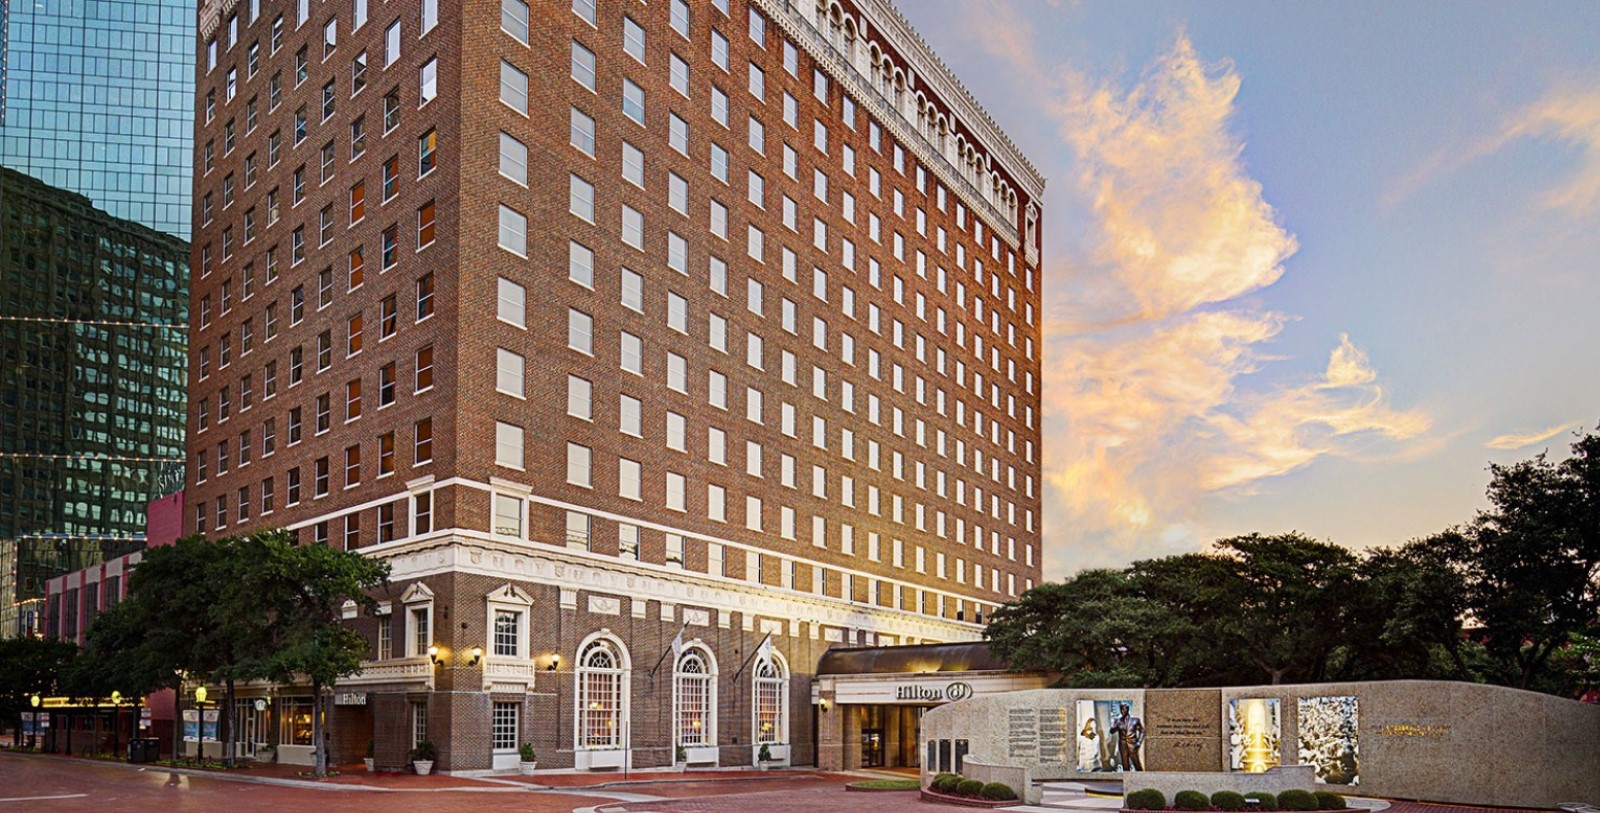 Discover the historic grandeur of the Hilton Fort Worth, the location of JFK's last public address.